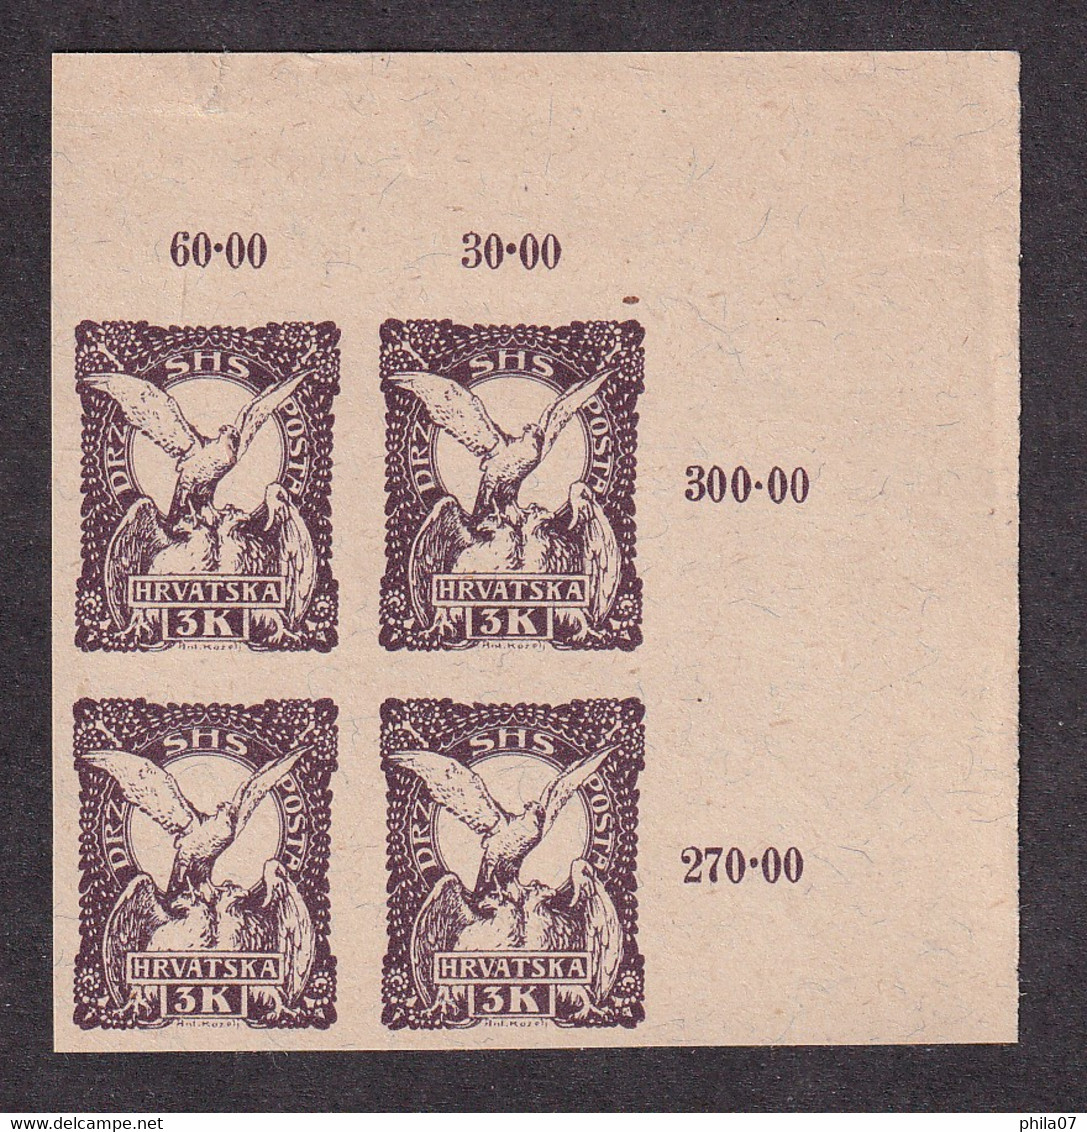 STATE OF SLOVENES, CROATS AND SERBS PS.No. 46 - Short Opinion Pervan - Imperforate Trial Print Of Stamp Of ... / 3 Scans - Ungebraucht